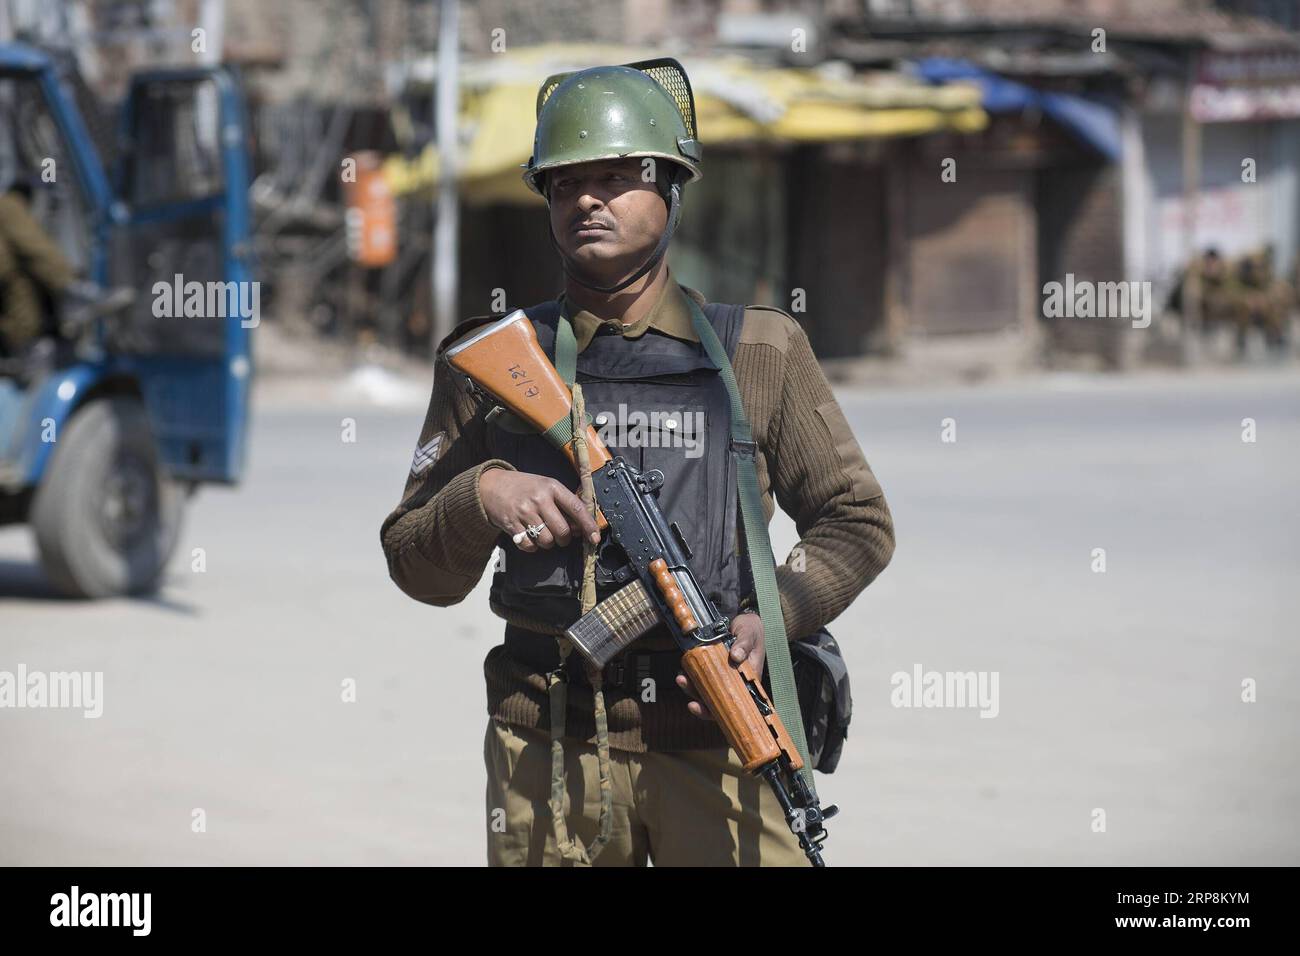 (190310) -- SRINAGAR, March 10, 2019 (Xinhua) -- An Indian paramilitary soldier stands guard during a security lockdown in downtown area of Srinagar, the summer capital of Indian-controlled Kashmir, March 10, 2019. Authorities on Sunday imposed restrictions in parts of Srinagar city to prevent protests after India s anti-terror agency, National Investigation Agency (NIA), summoned key separatist leader and chief cleric of Indian-controlled Kashmir for questioning in an alleged funding case, officials said on Saturday. Mirwaiz Umar Farooq has been asked to appear before the probe agency on Mond Stock Photo